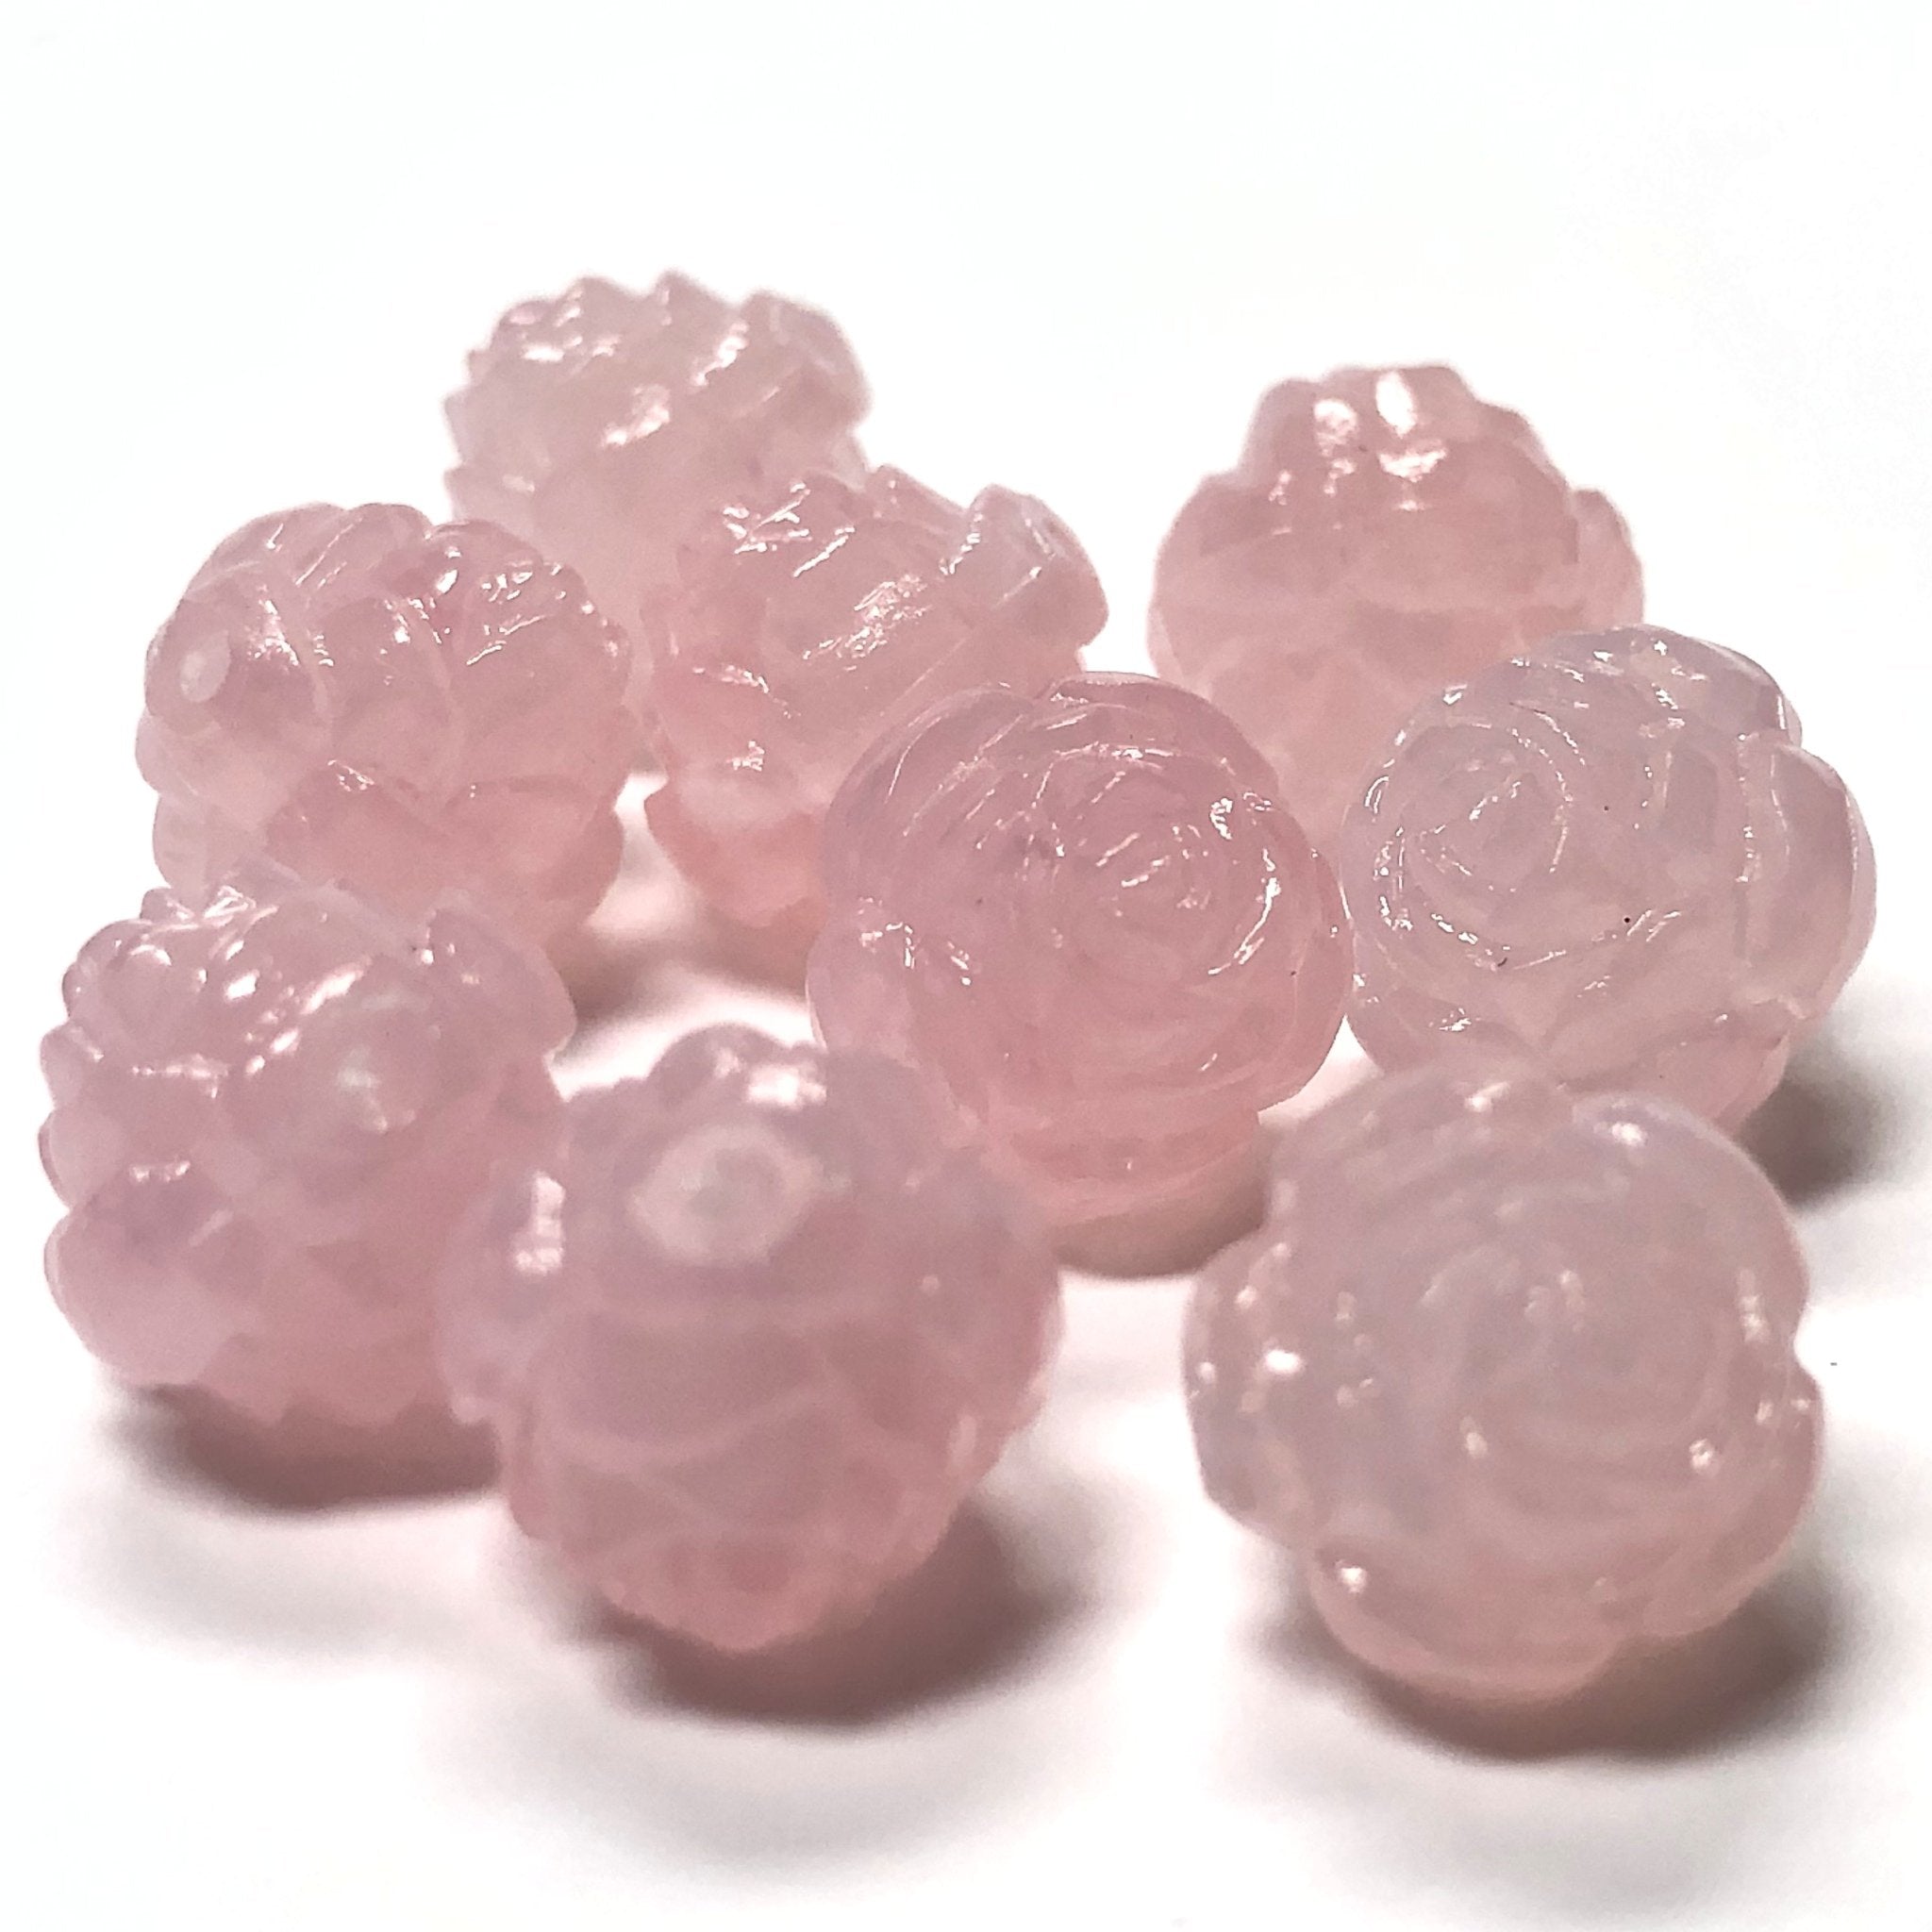 10MM Pink "Agate" Rosebud Acrylic Bead (72 pieces)